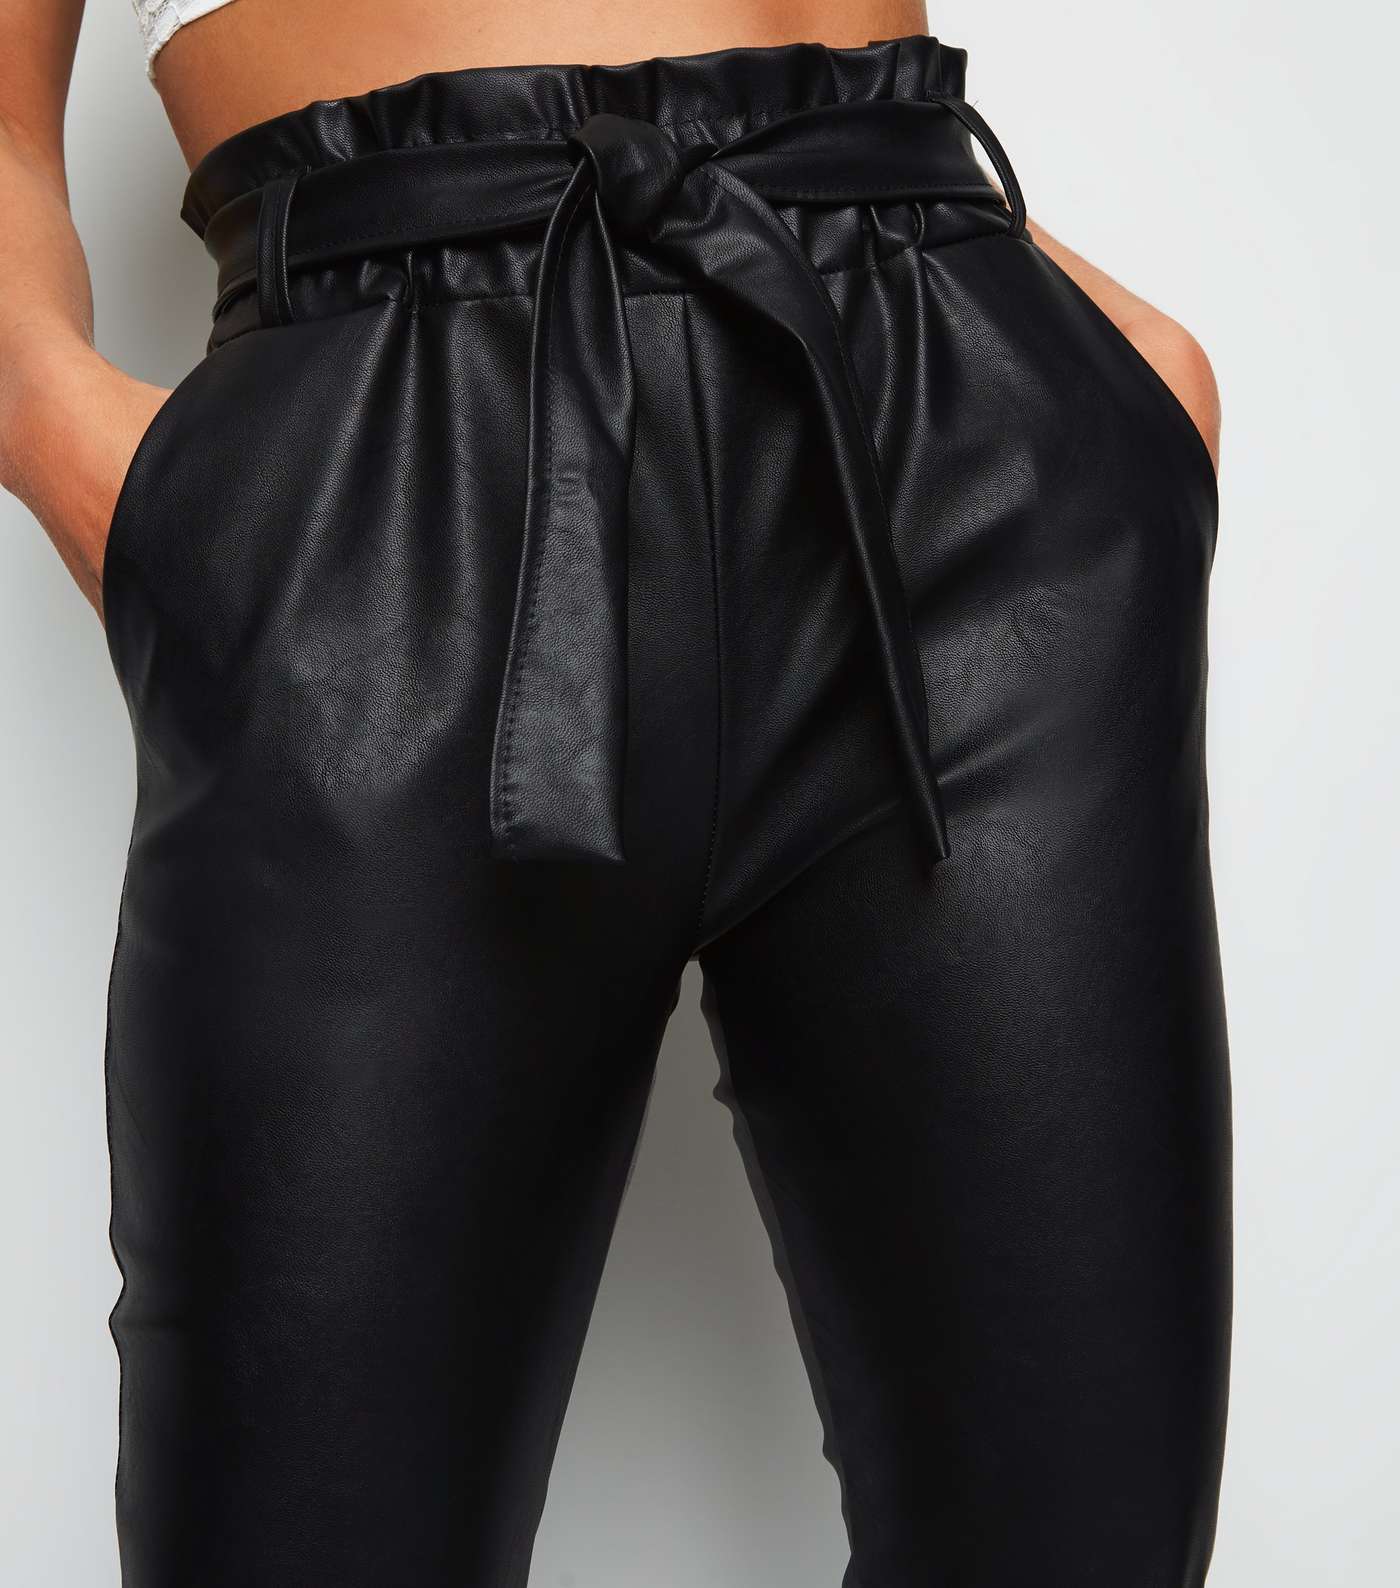 Cameo Rose Black Leather-Look High Waist Trousers Image 5